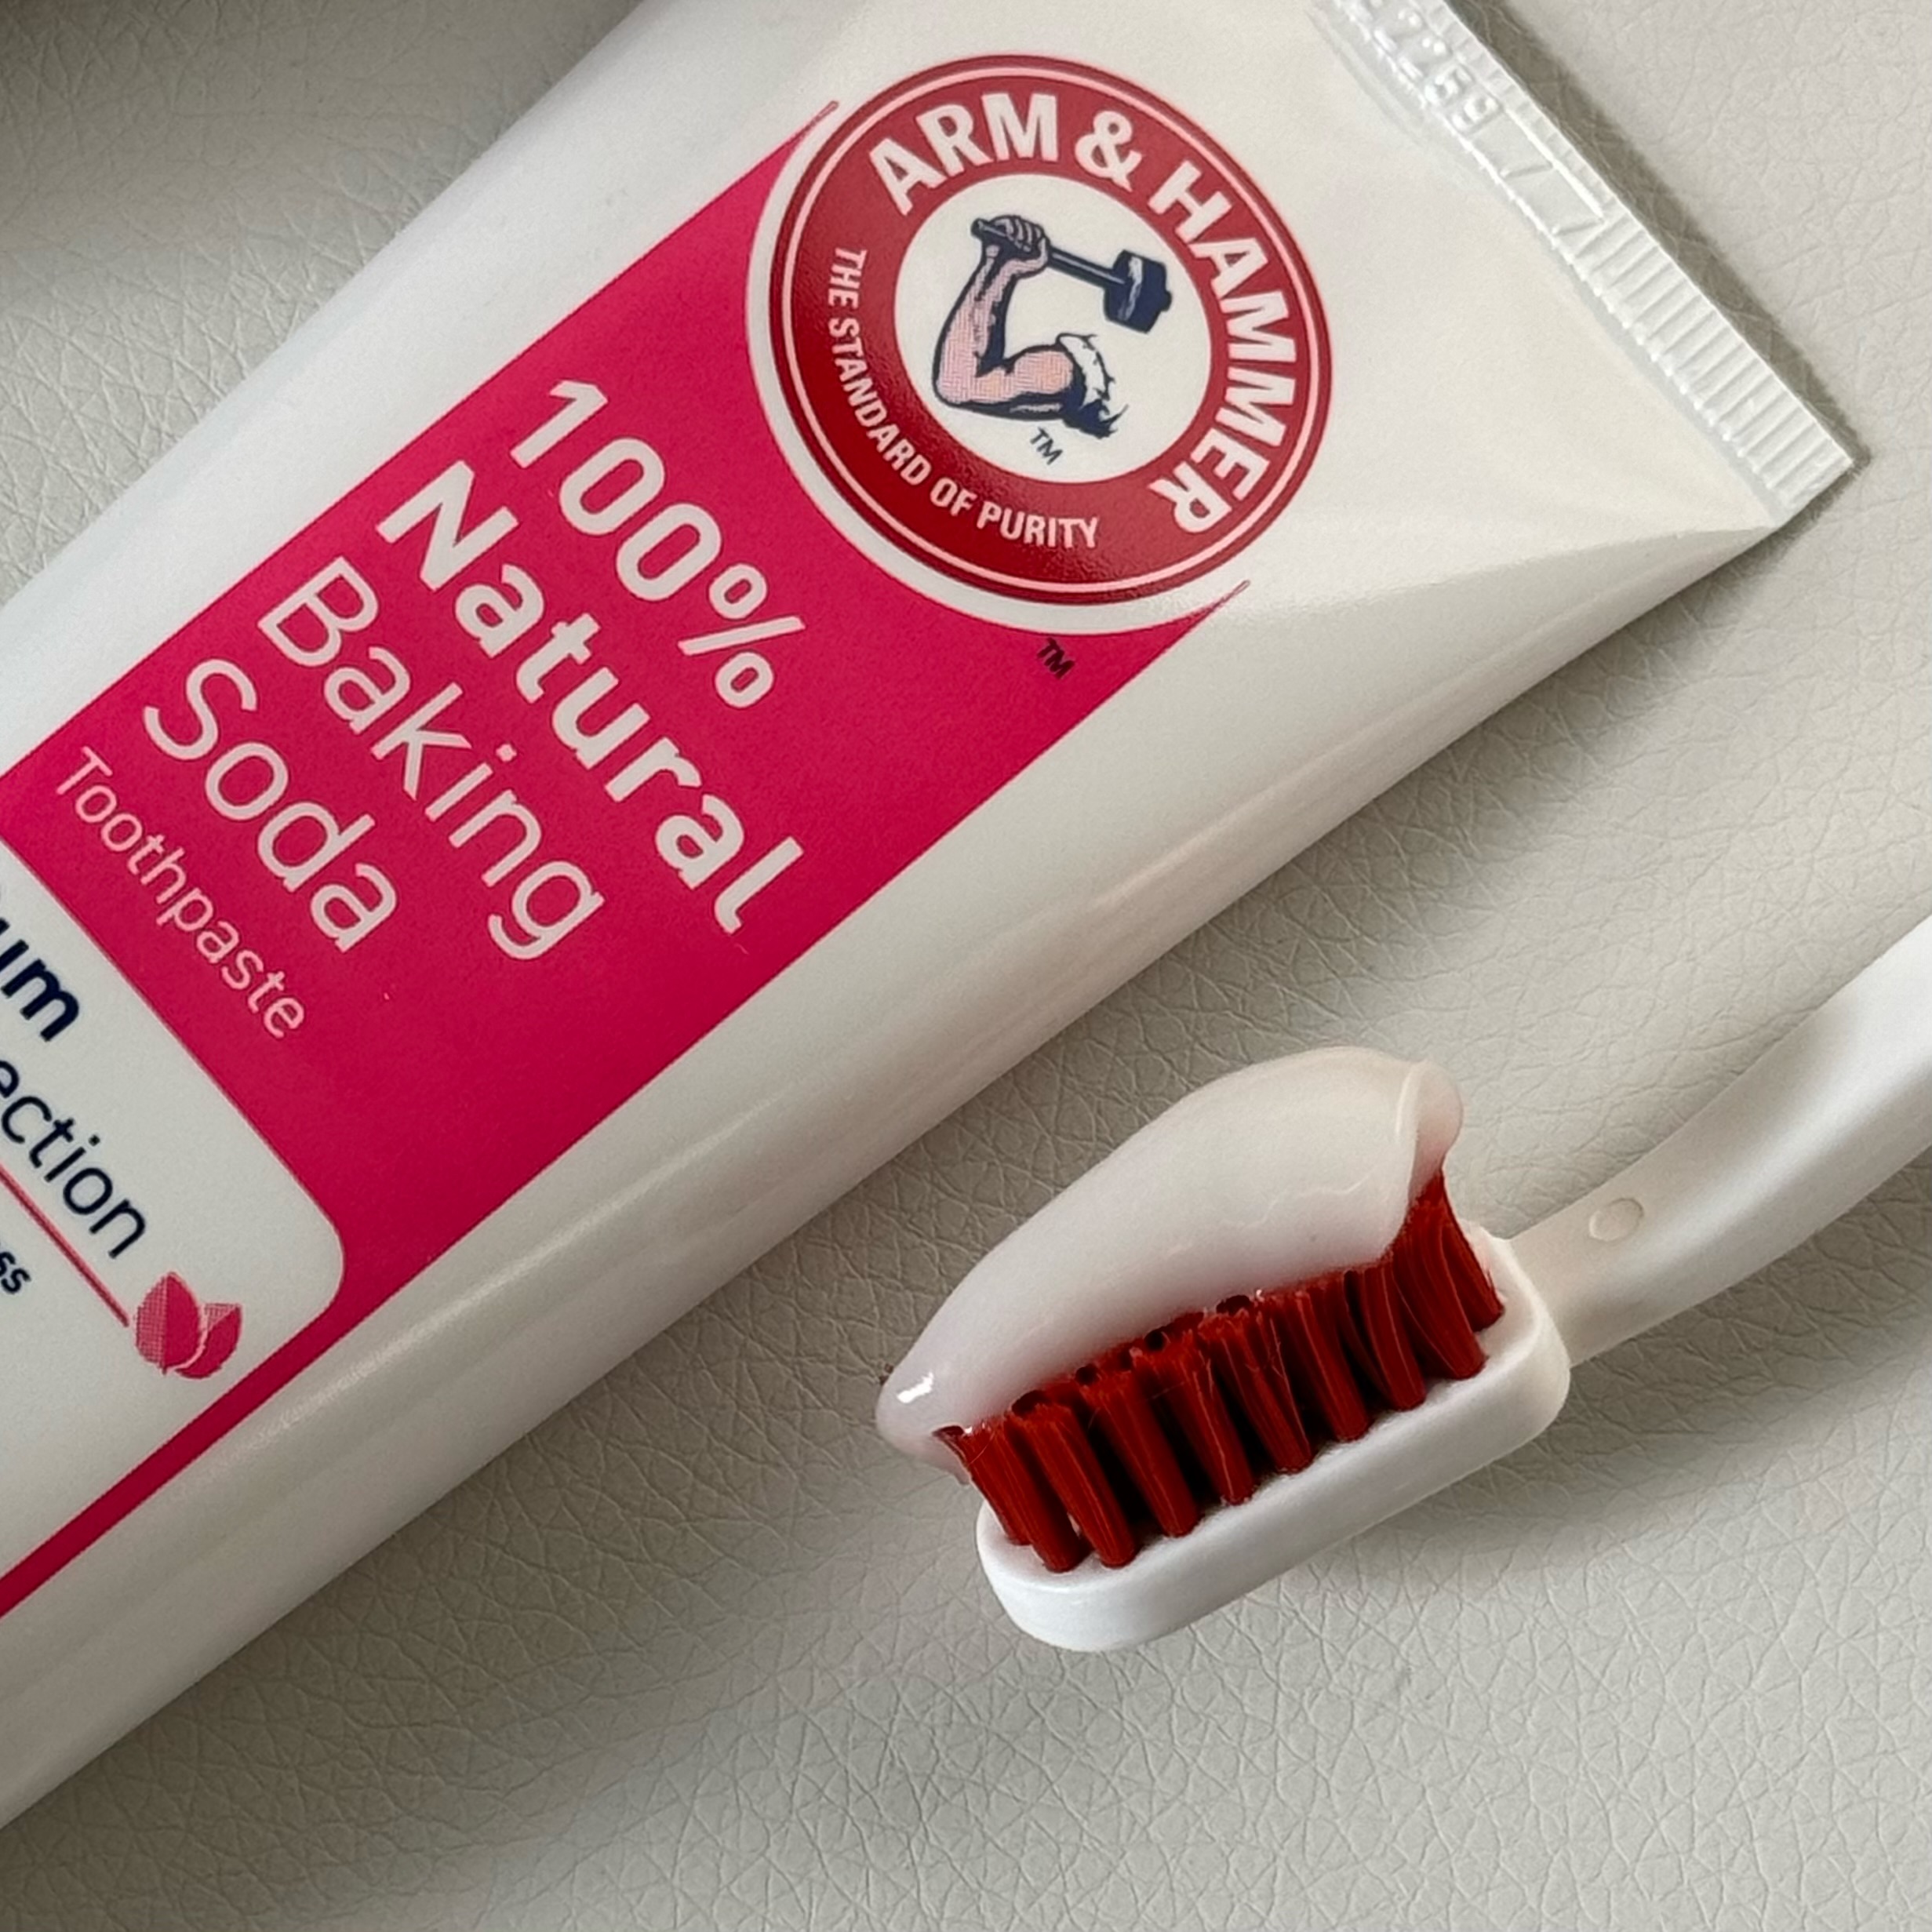 Arm & Hammer 100% Natural Baking Soda Gum Protection Toothpaste